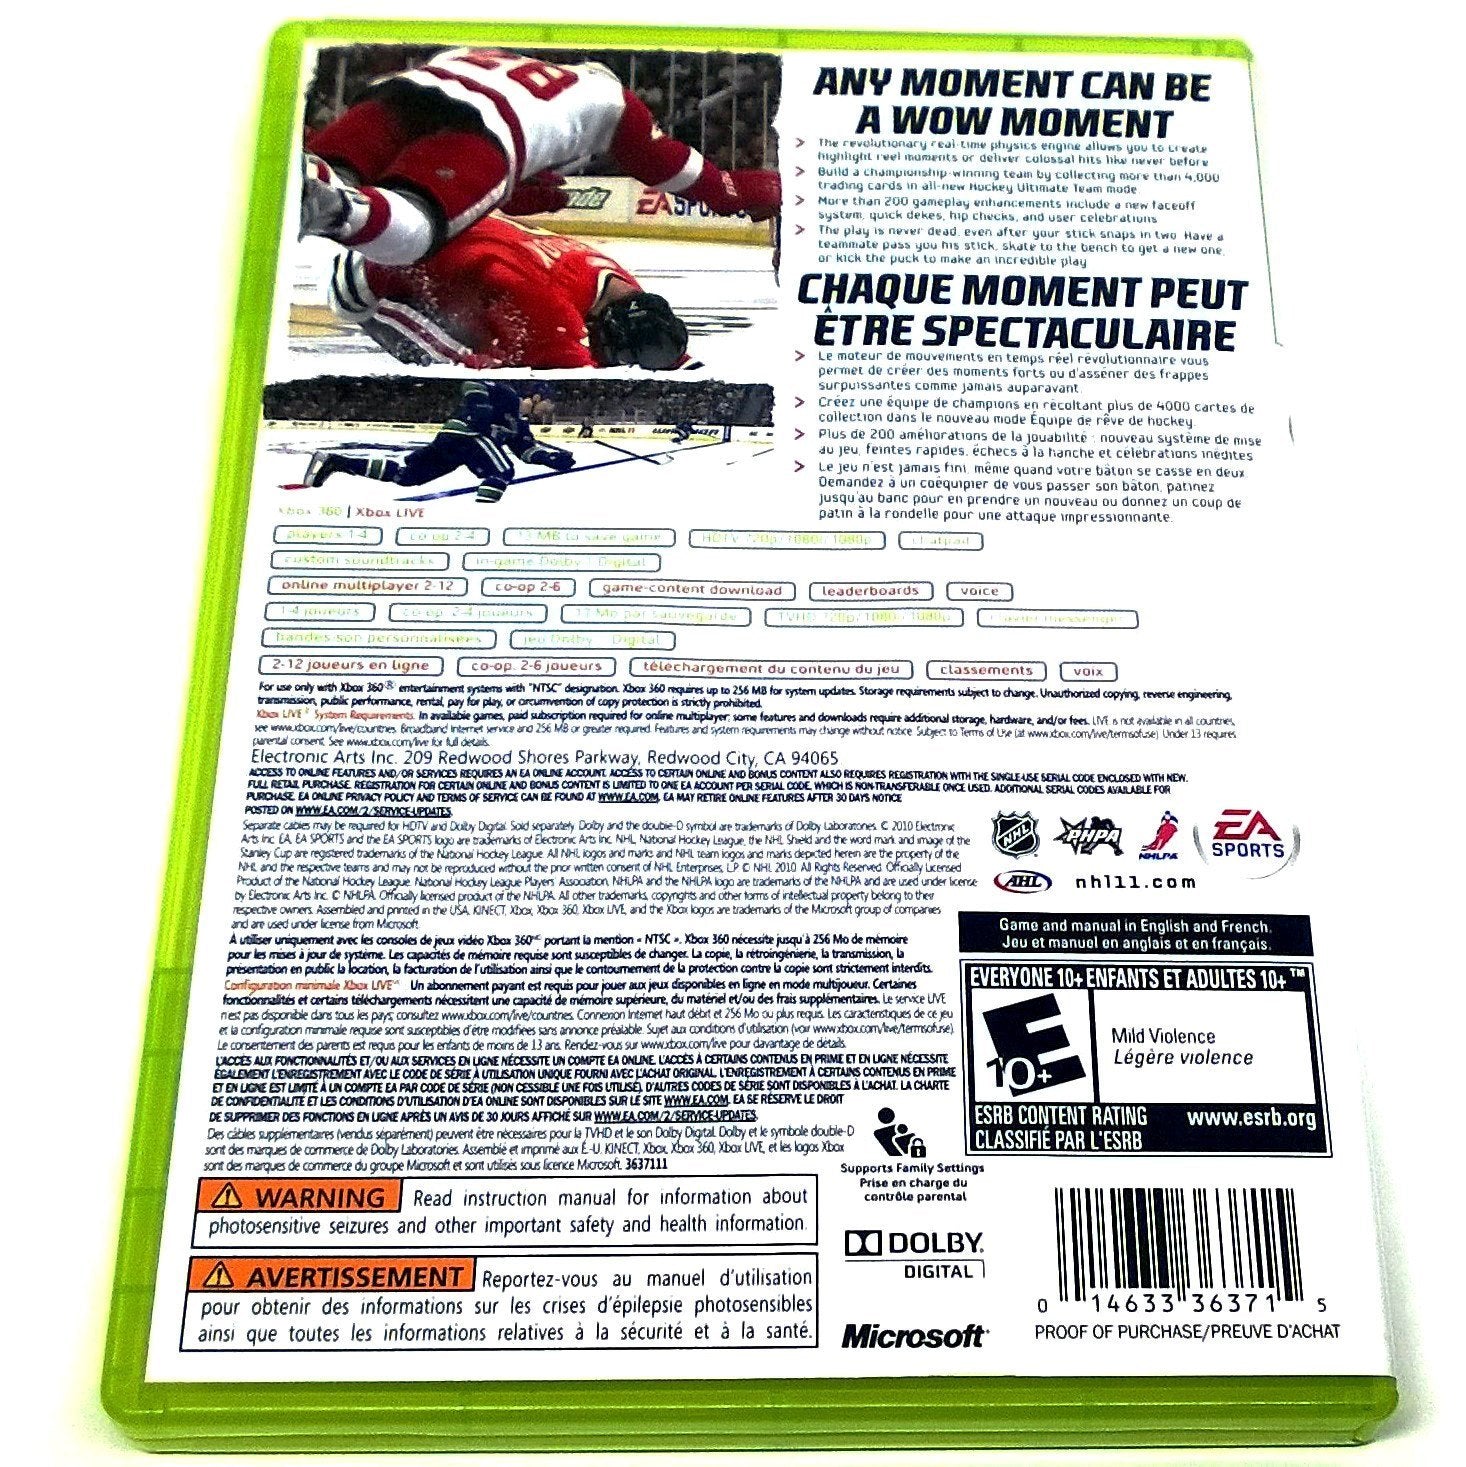 NHL 11 for Xbox 360 - Back of case